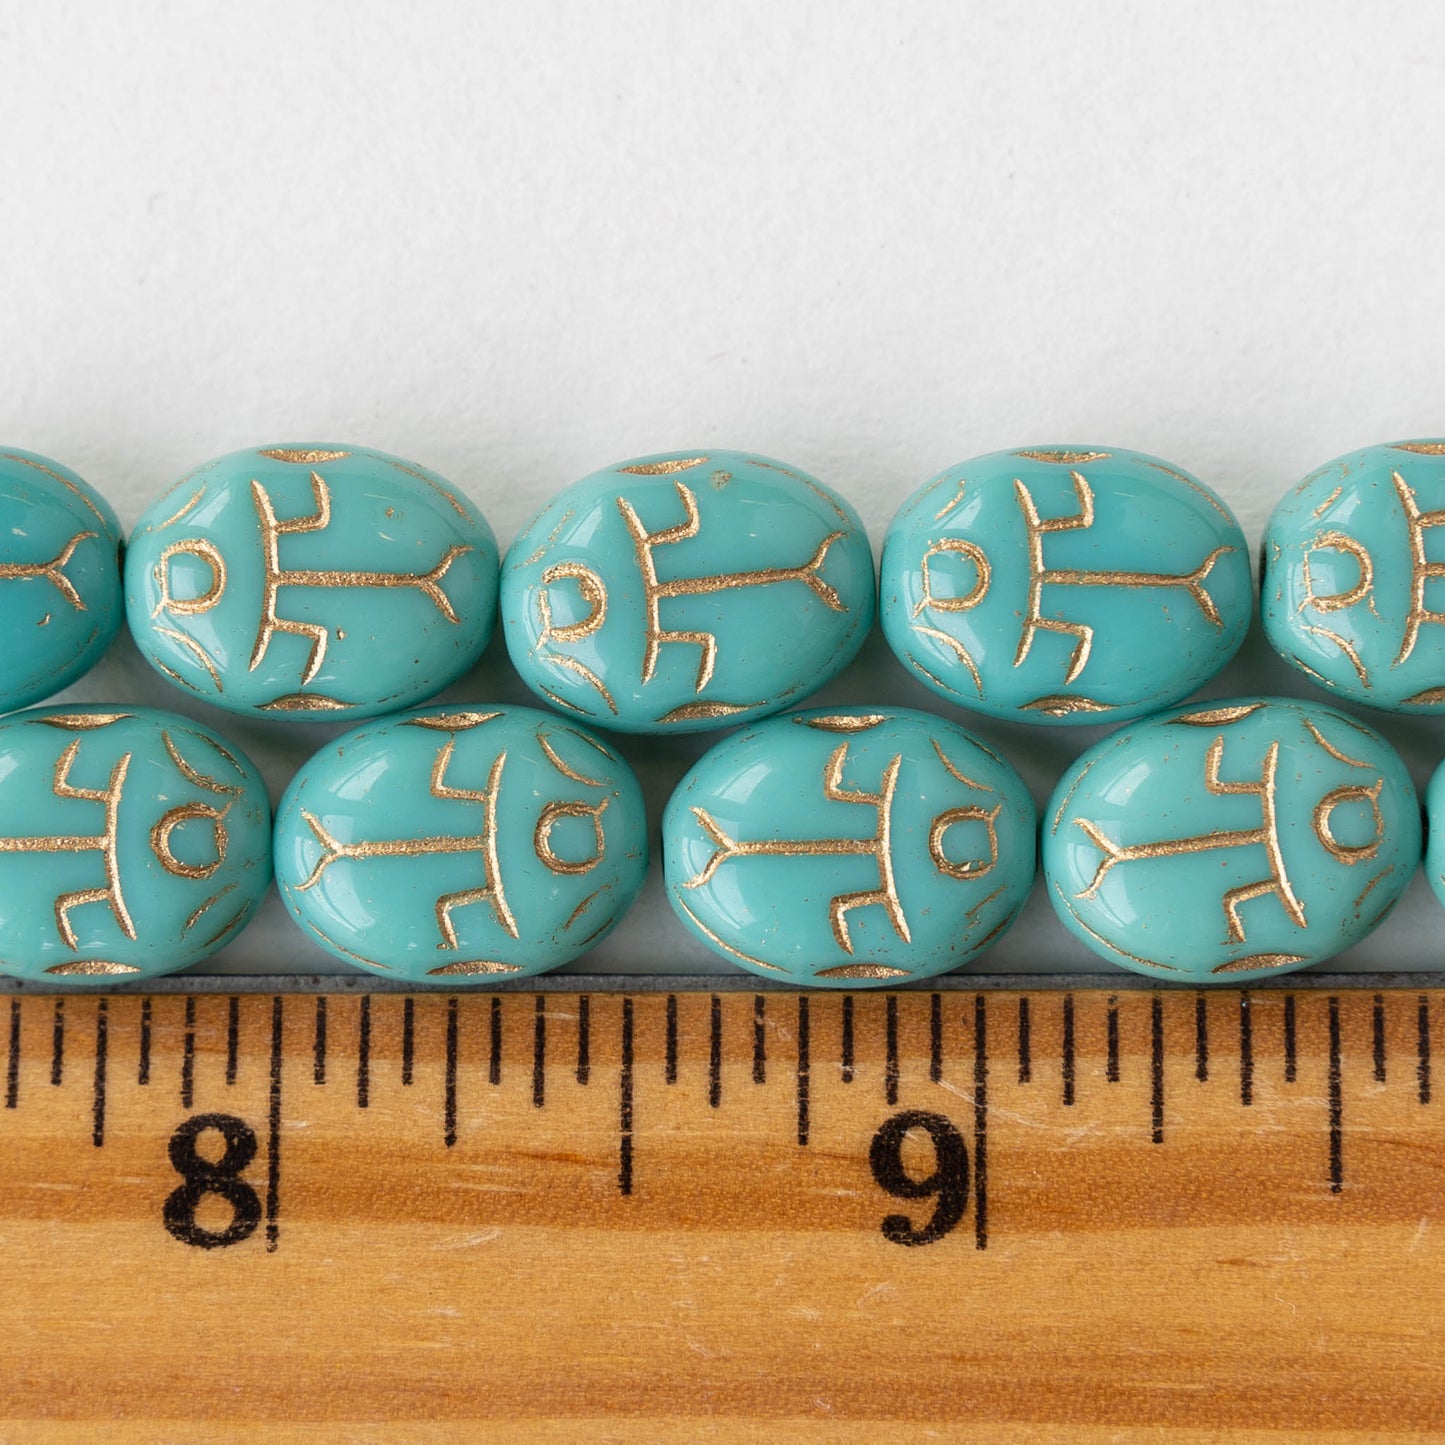 Metallic Scarab Beads - Turquoise with Gold Wash - 8 beads